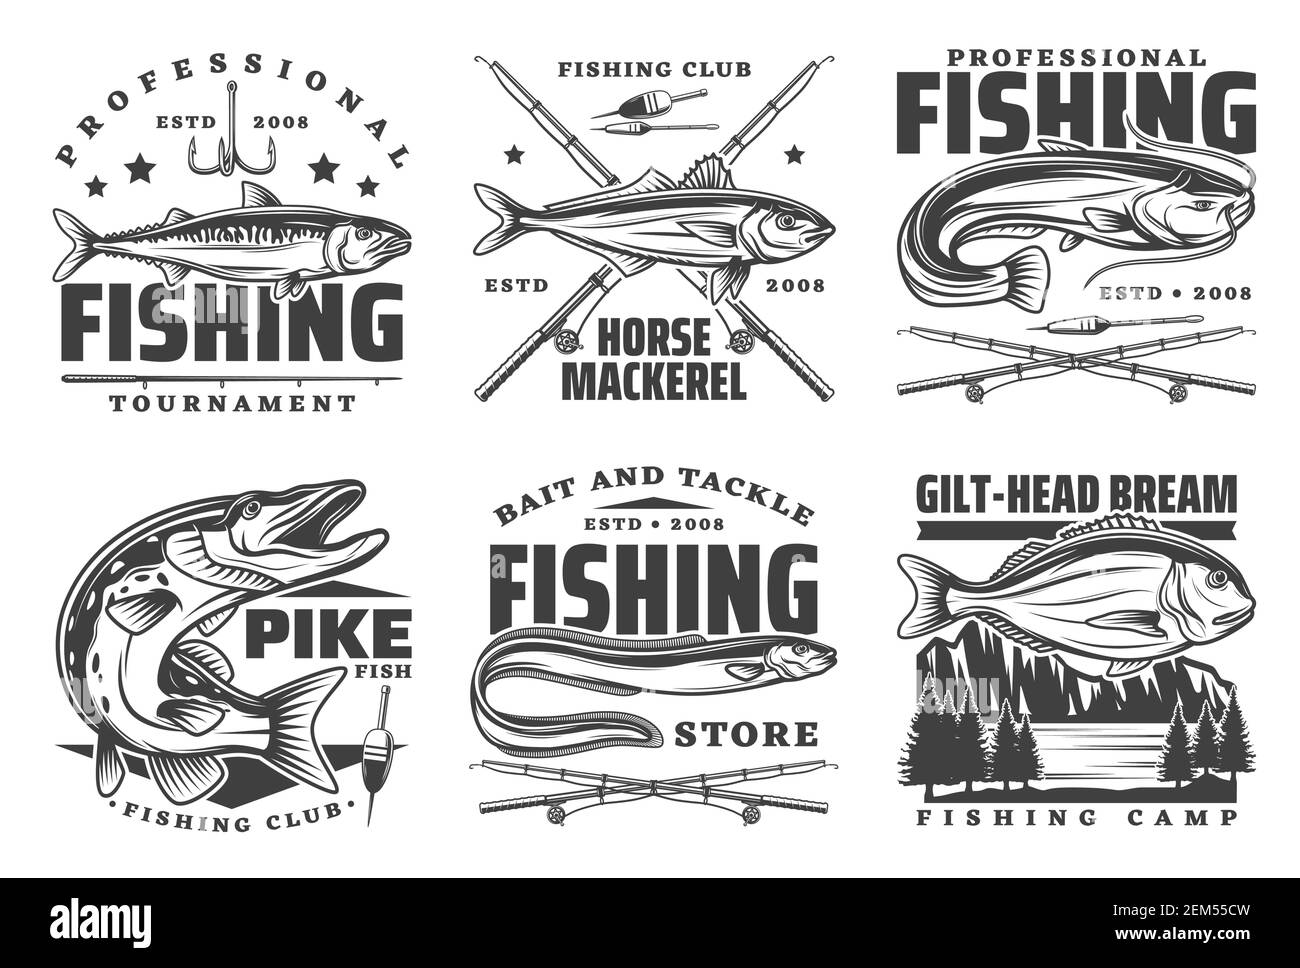 https://c8.alamy.com/comp/2EM55CW/fishing-icons-and-fisherman-club-signs-sport-tournament-and-fish-catch-lures-baits-and-tackles-shop-icons-vector-river-sheatfish-pike-and-gilt-hea-2EM55CW.jpg